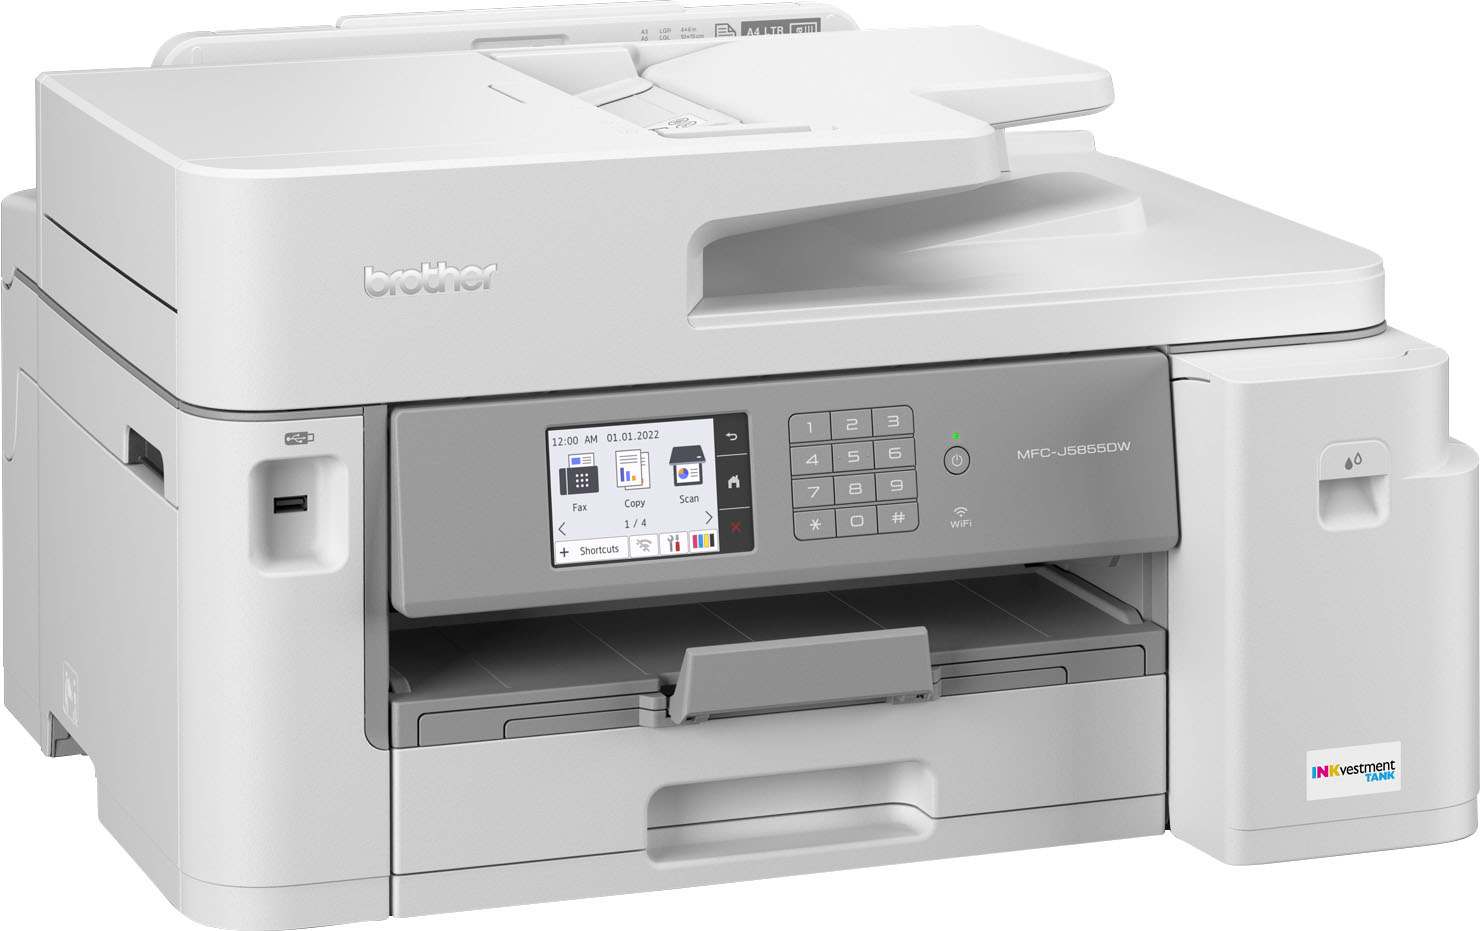 Brother MFC-J1010DW Color Inkjet All-in-One Printer with Wireless